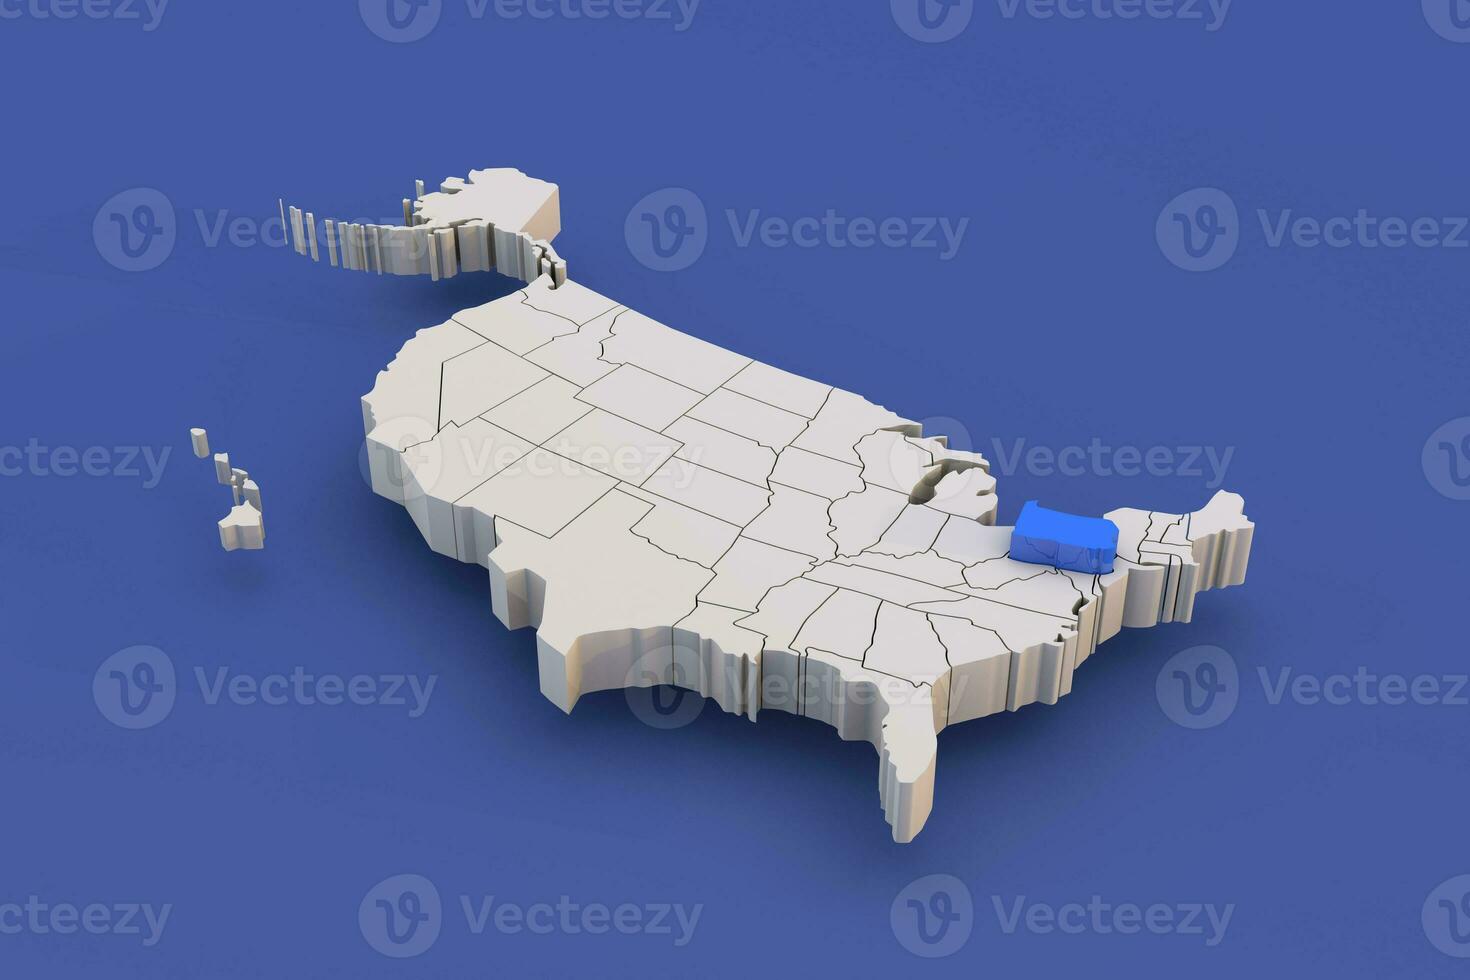 Pennsylvania state of USA map with white states a 3D united states of america map photo